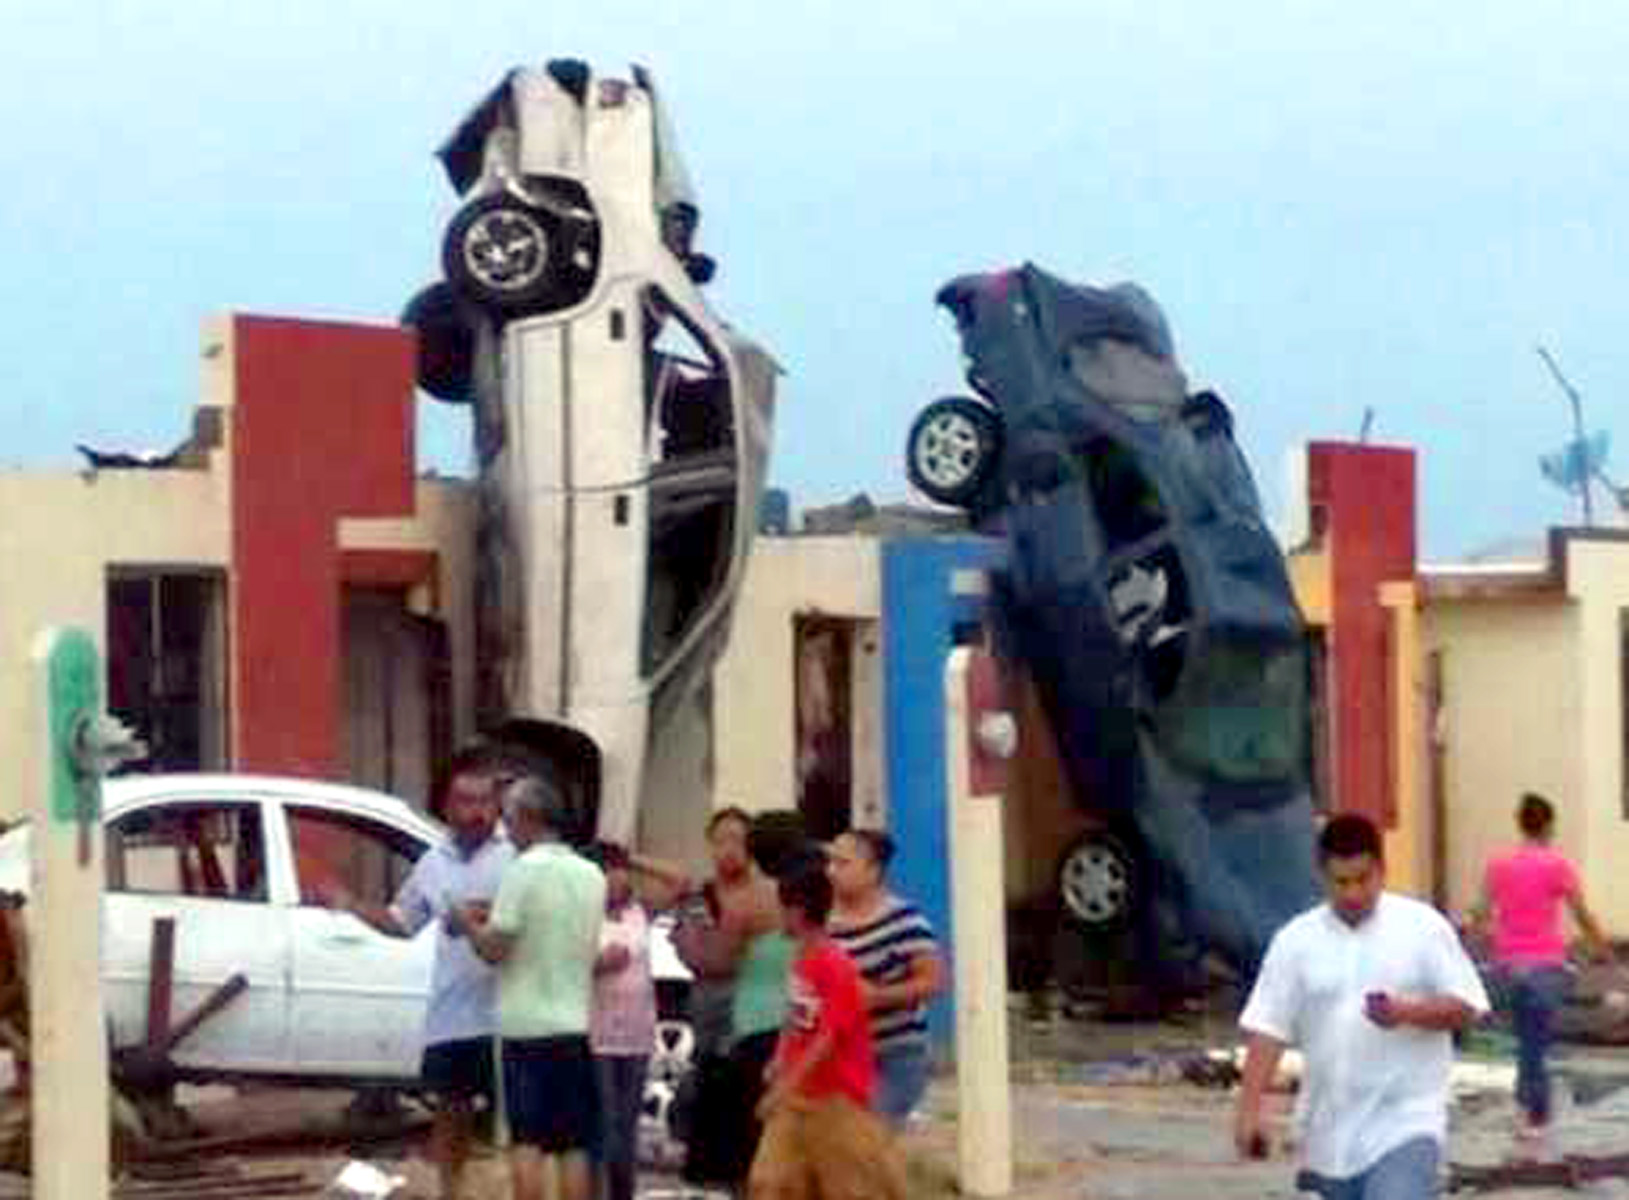 The tornado that swept through the border city of Ciudad Acuña tossed vehicles around like matchsticks.